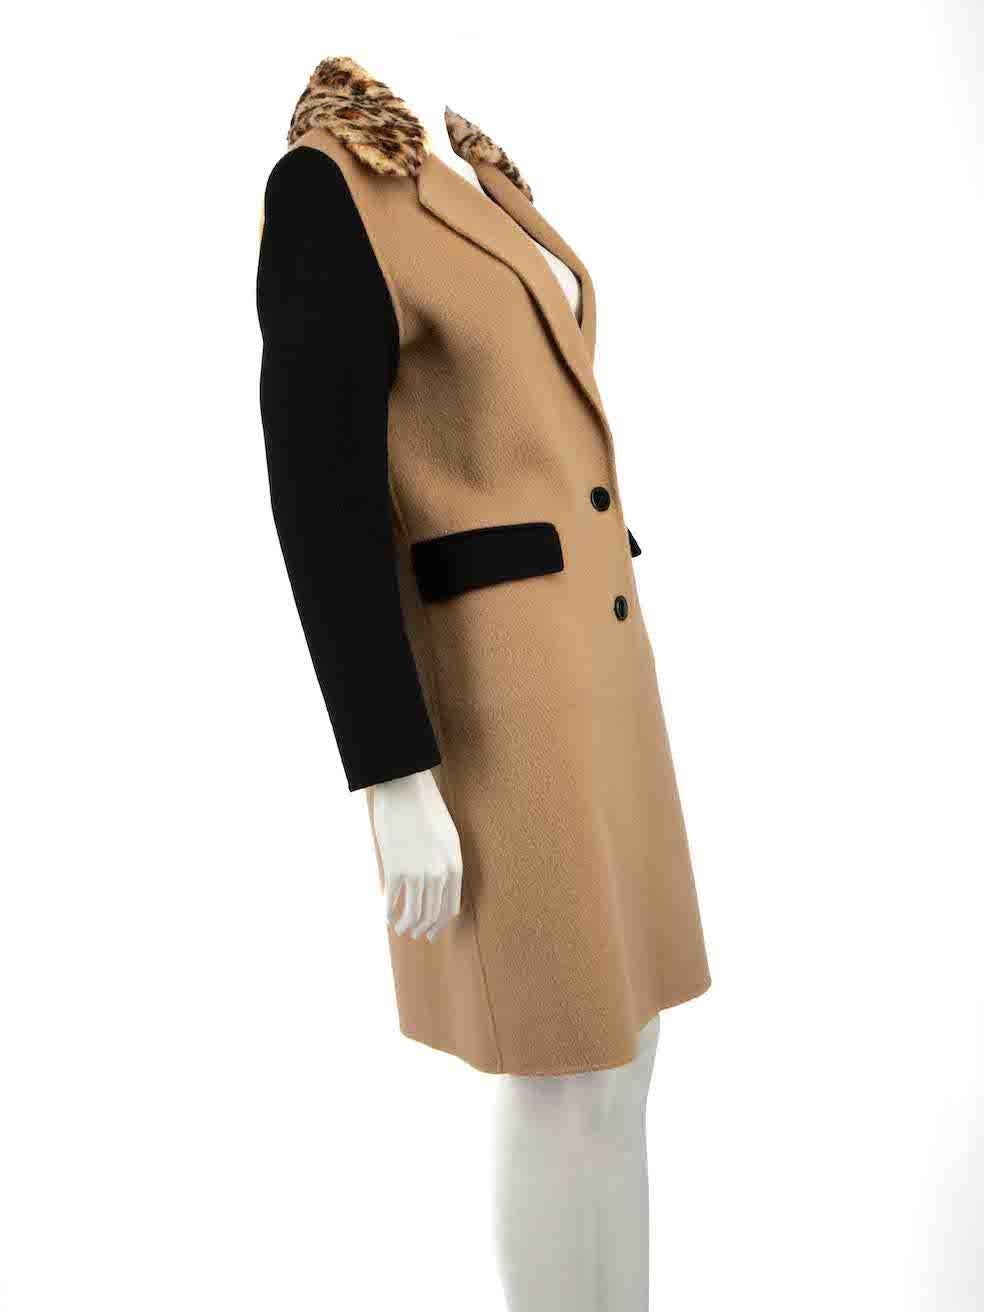 CONDITION is Very good. Hardly any visible wear to coat is evident on this used Pinko designer resale item.
 
 
 
 Details
 
 
 Beige
 
 Wool
 
 Coat
 
 Black sleeves
 
 Button up fastening
 
 Black sleeves and pocket flap
 
 2x Pockets
 
